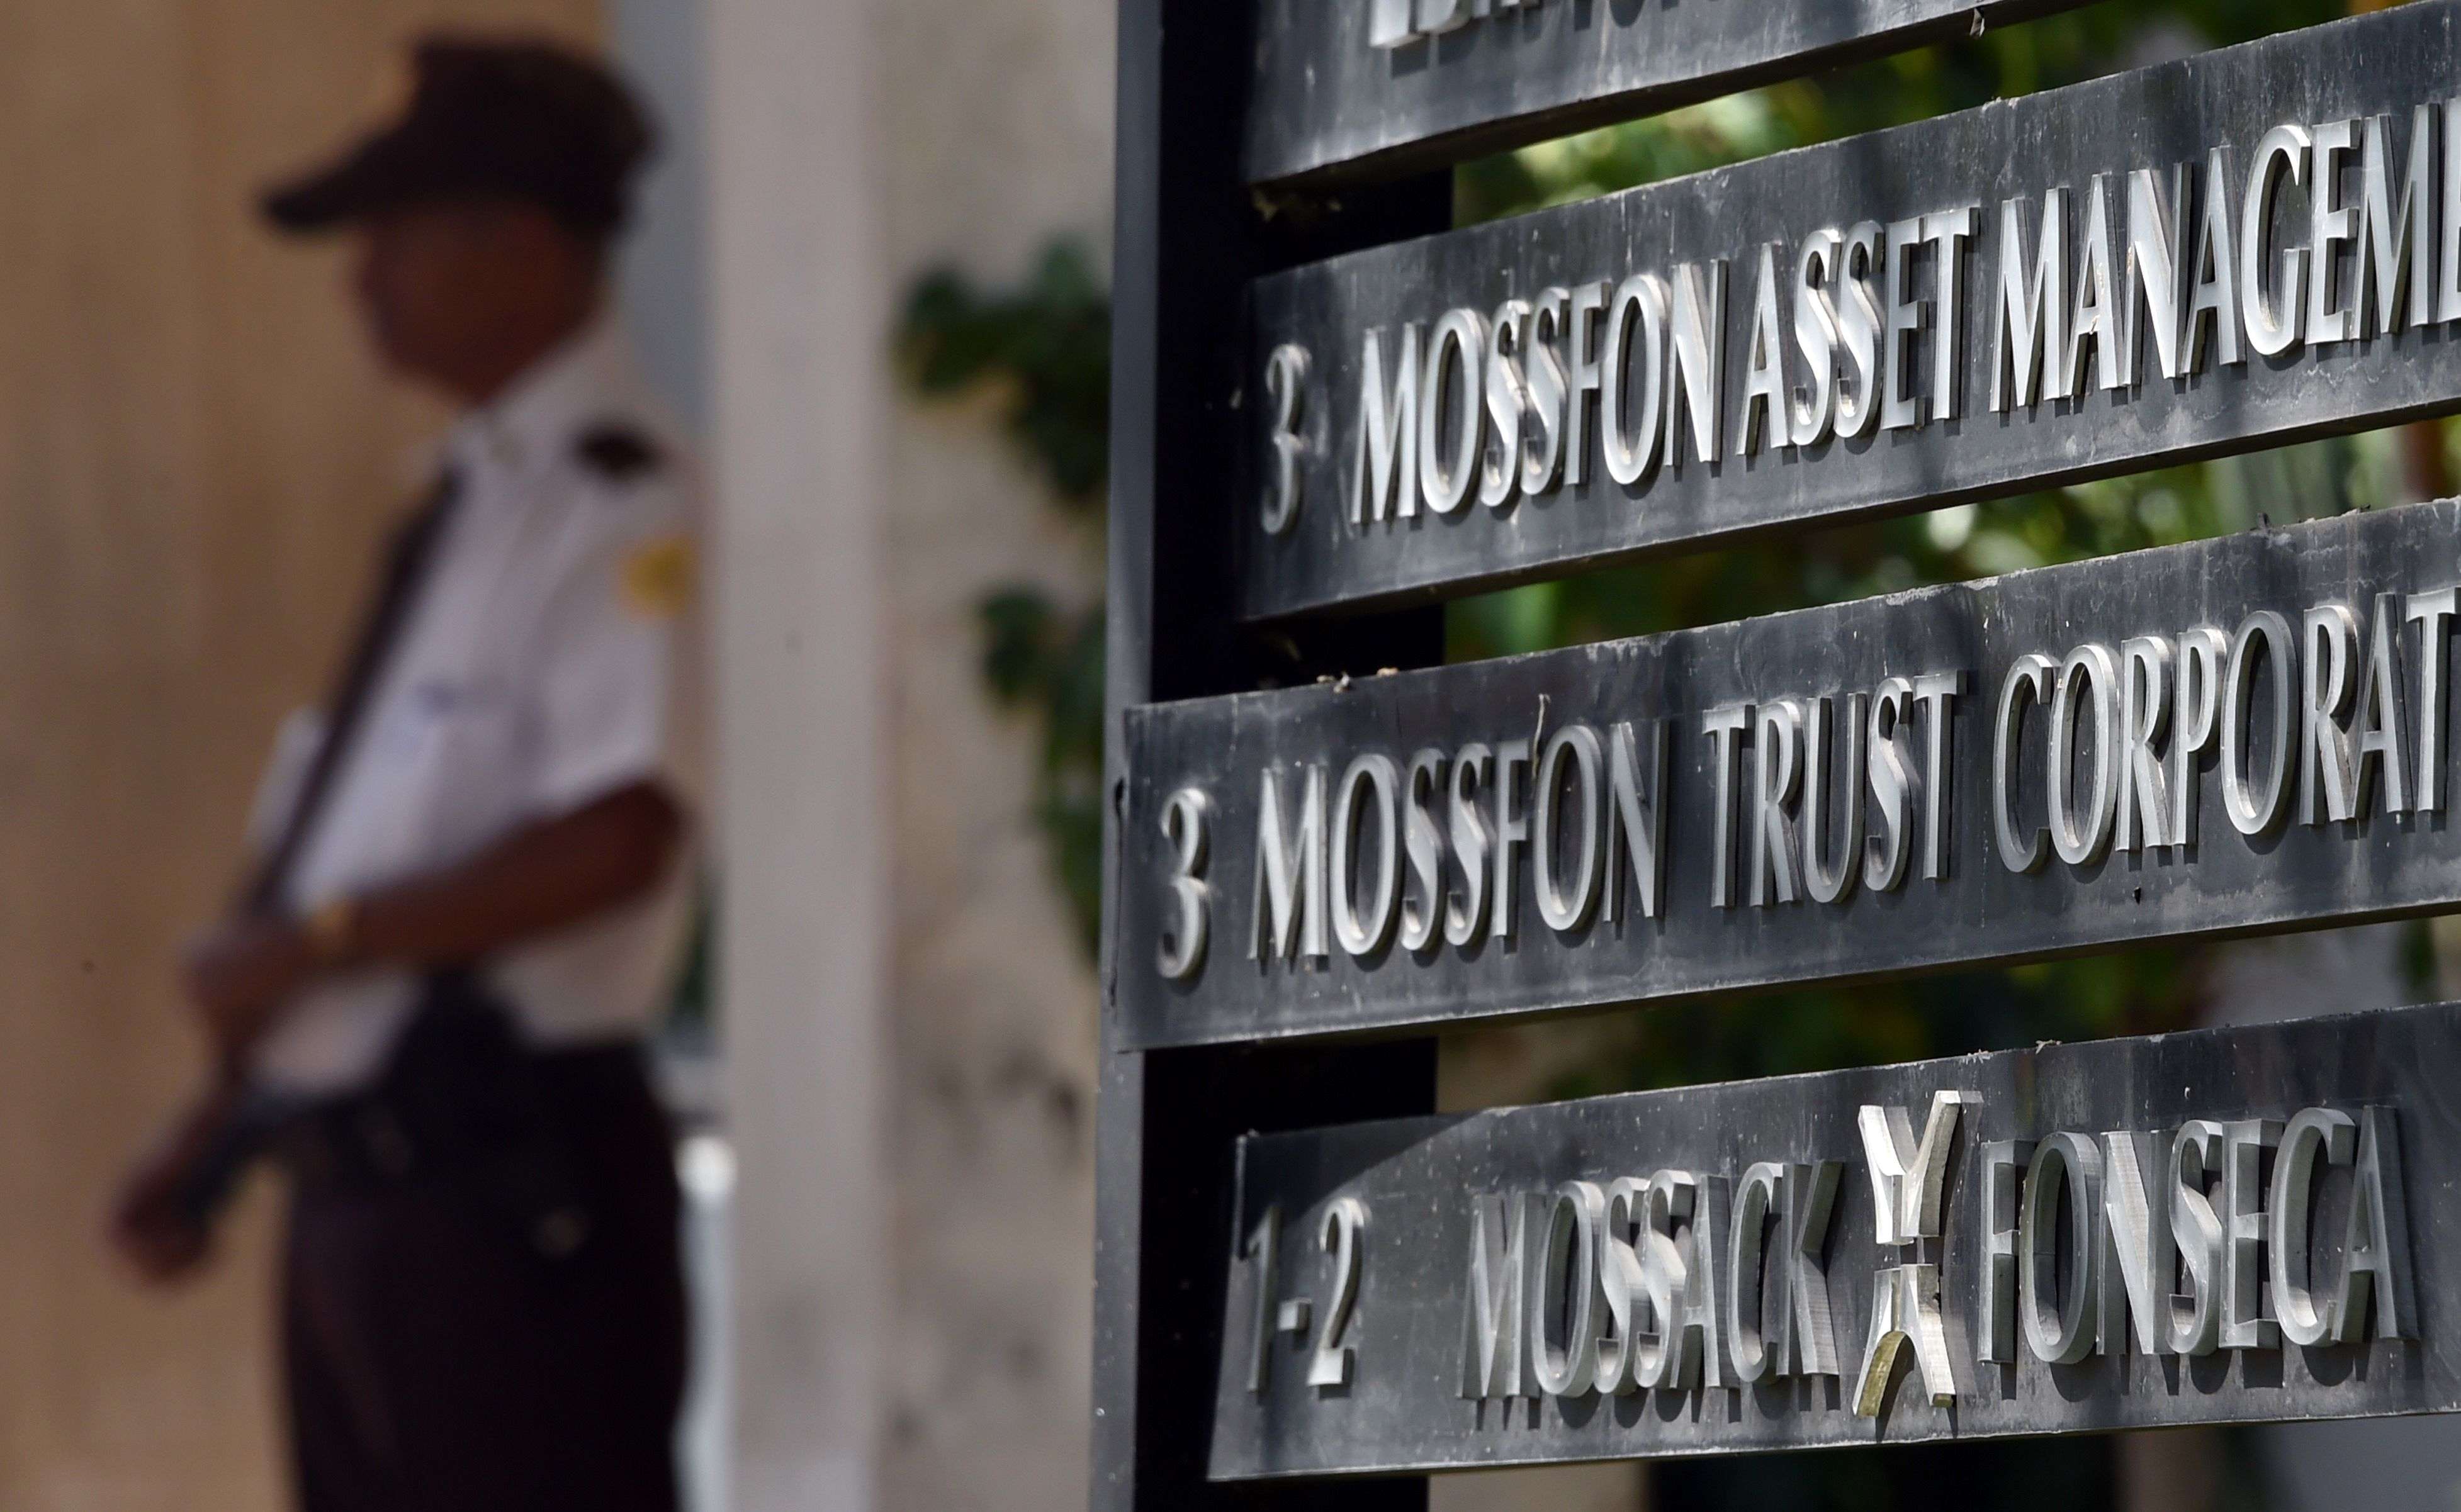 A private security guard stands outside the building where Panama-based Mossack Fonseca law firm is based, in Panama City, on April 5, 2016. A massive leak - coming from Mossack Fonseca - of 11.5 million tax documents exposed the secret offshore dealings of world leaders, celebrities and institutions. Photo: AFP